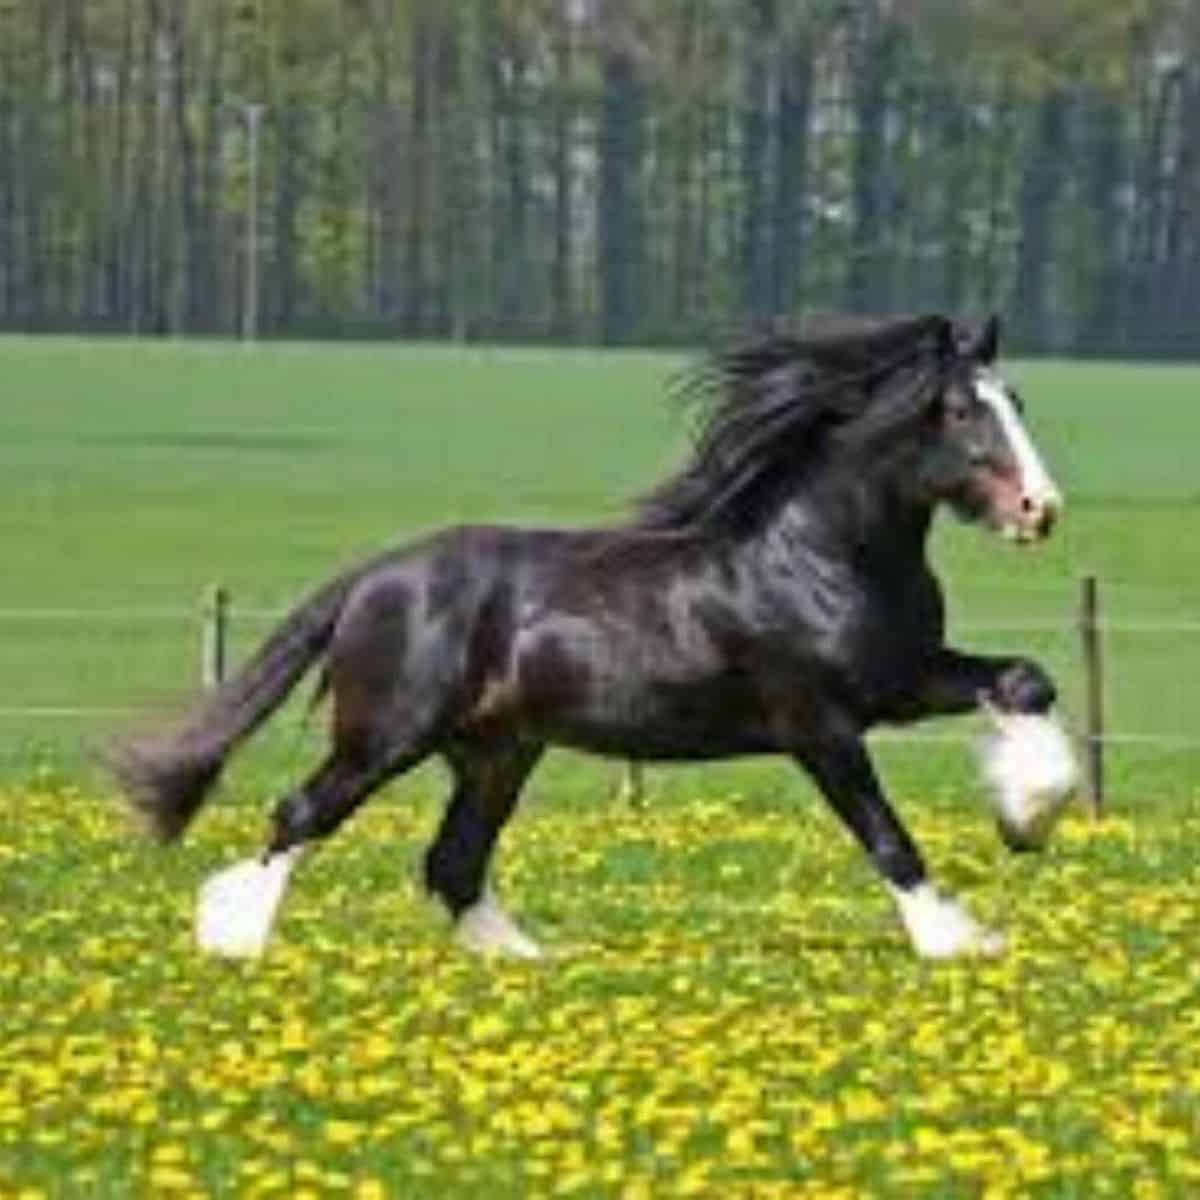 Black Shire horse with white feathered legs running on a meadow.